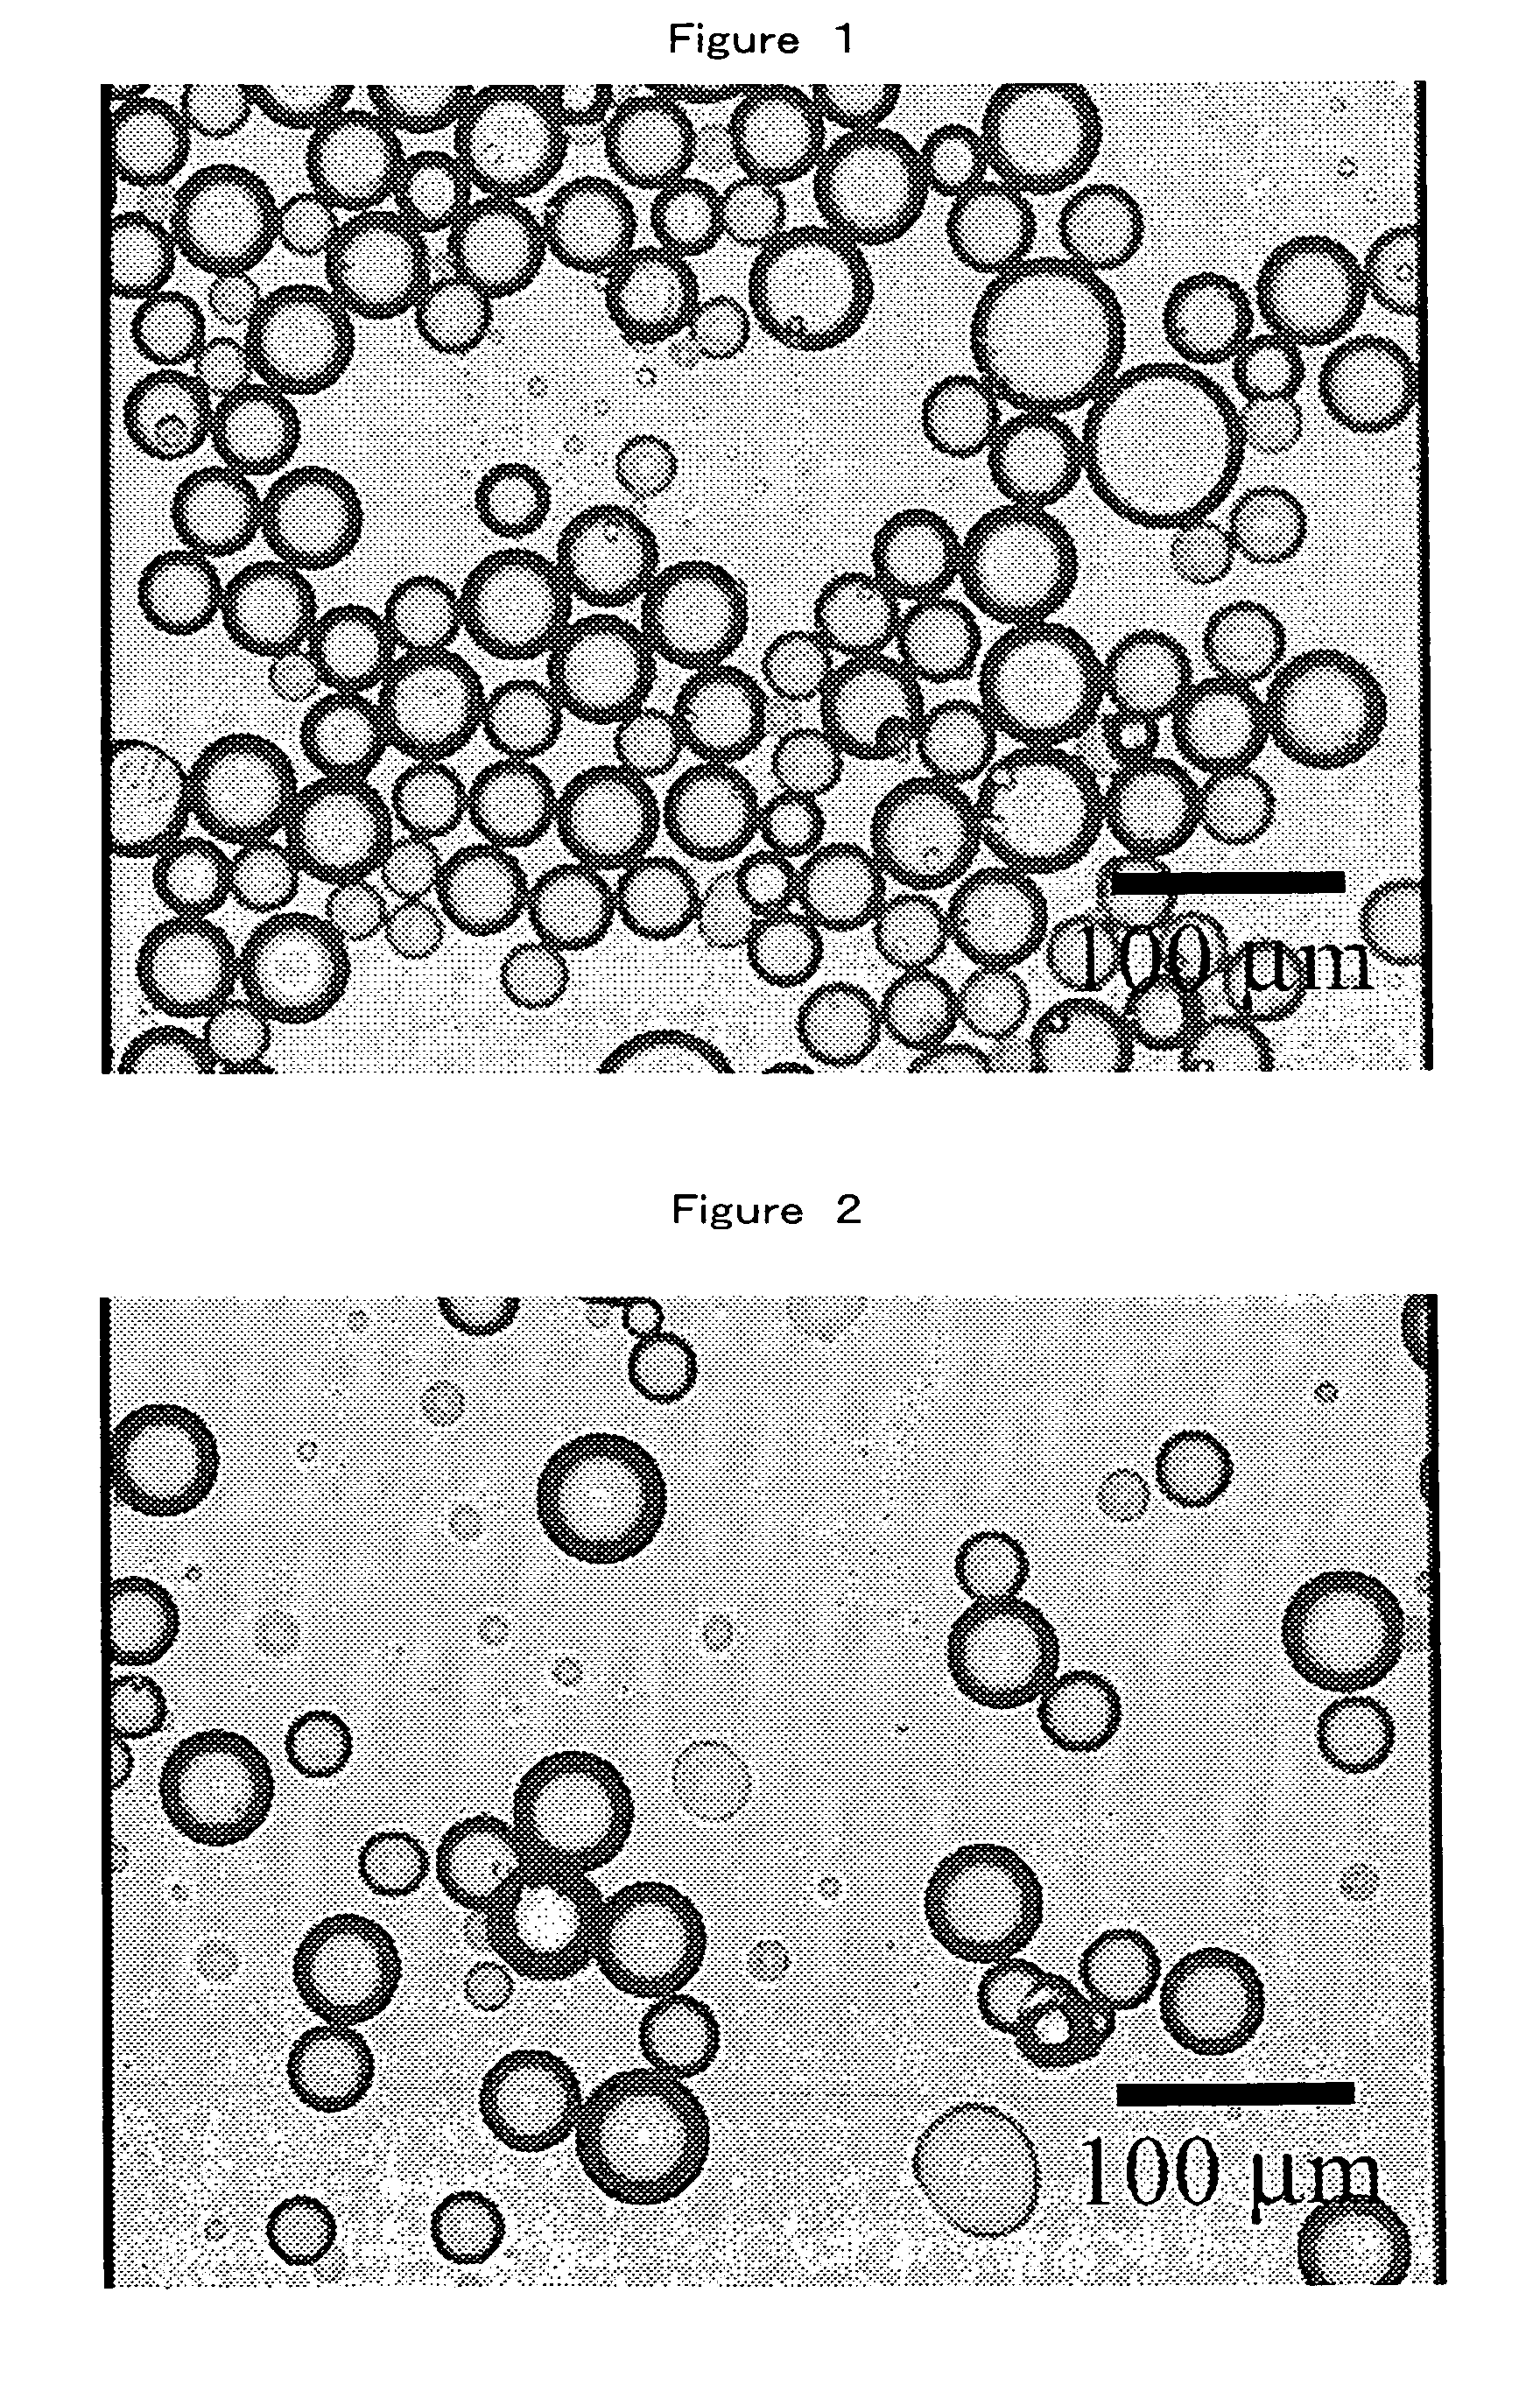 Process for producing electrophoretic microcapsules